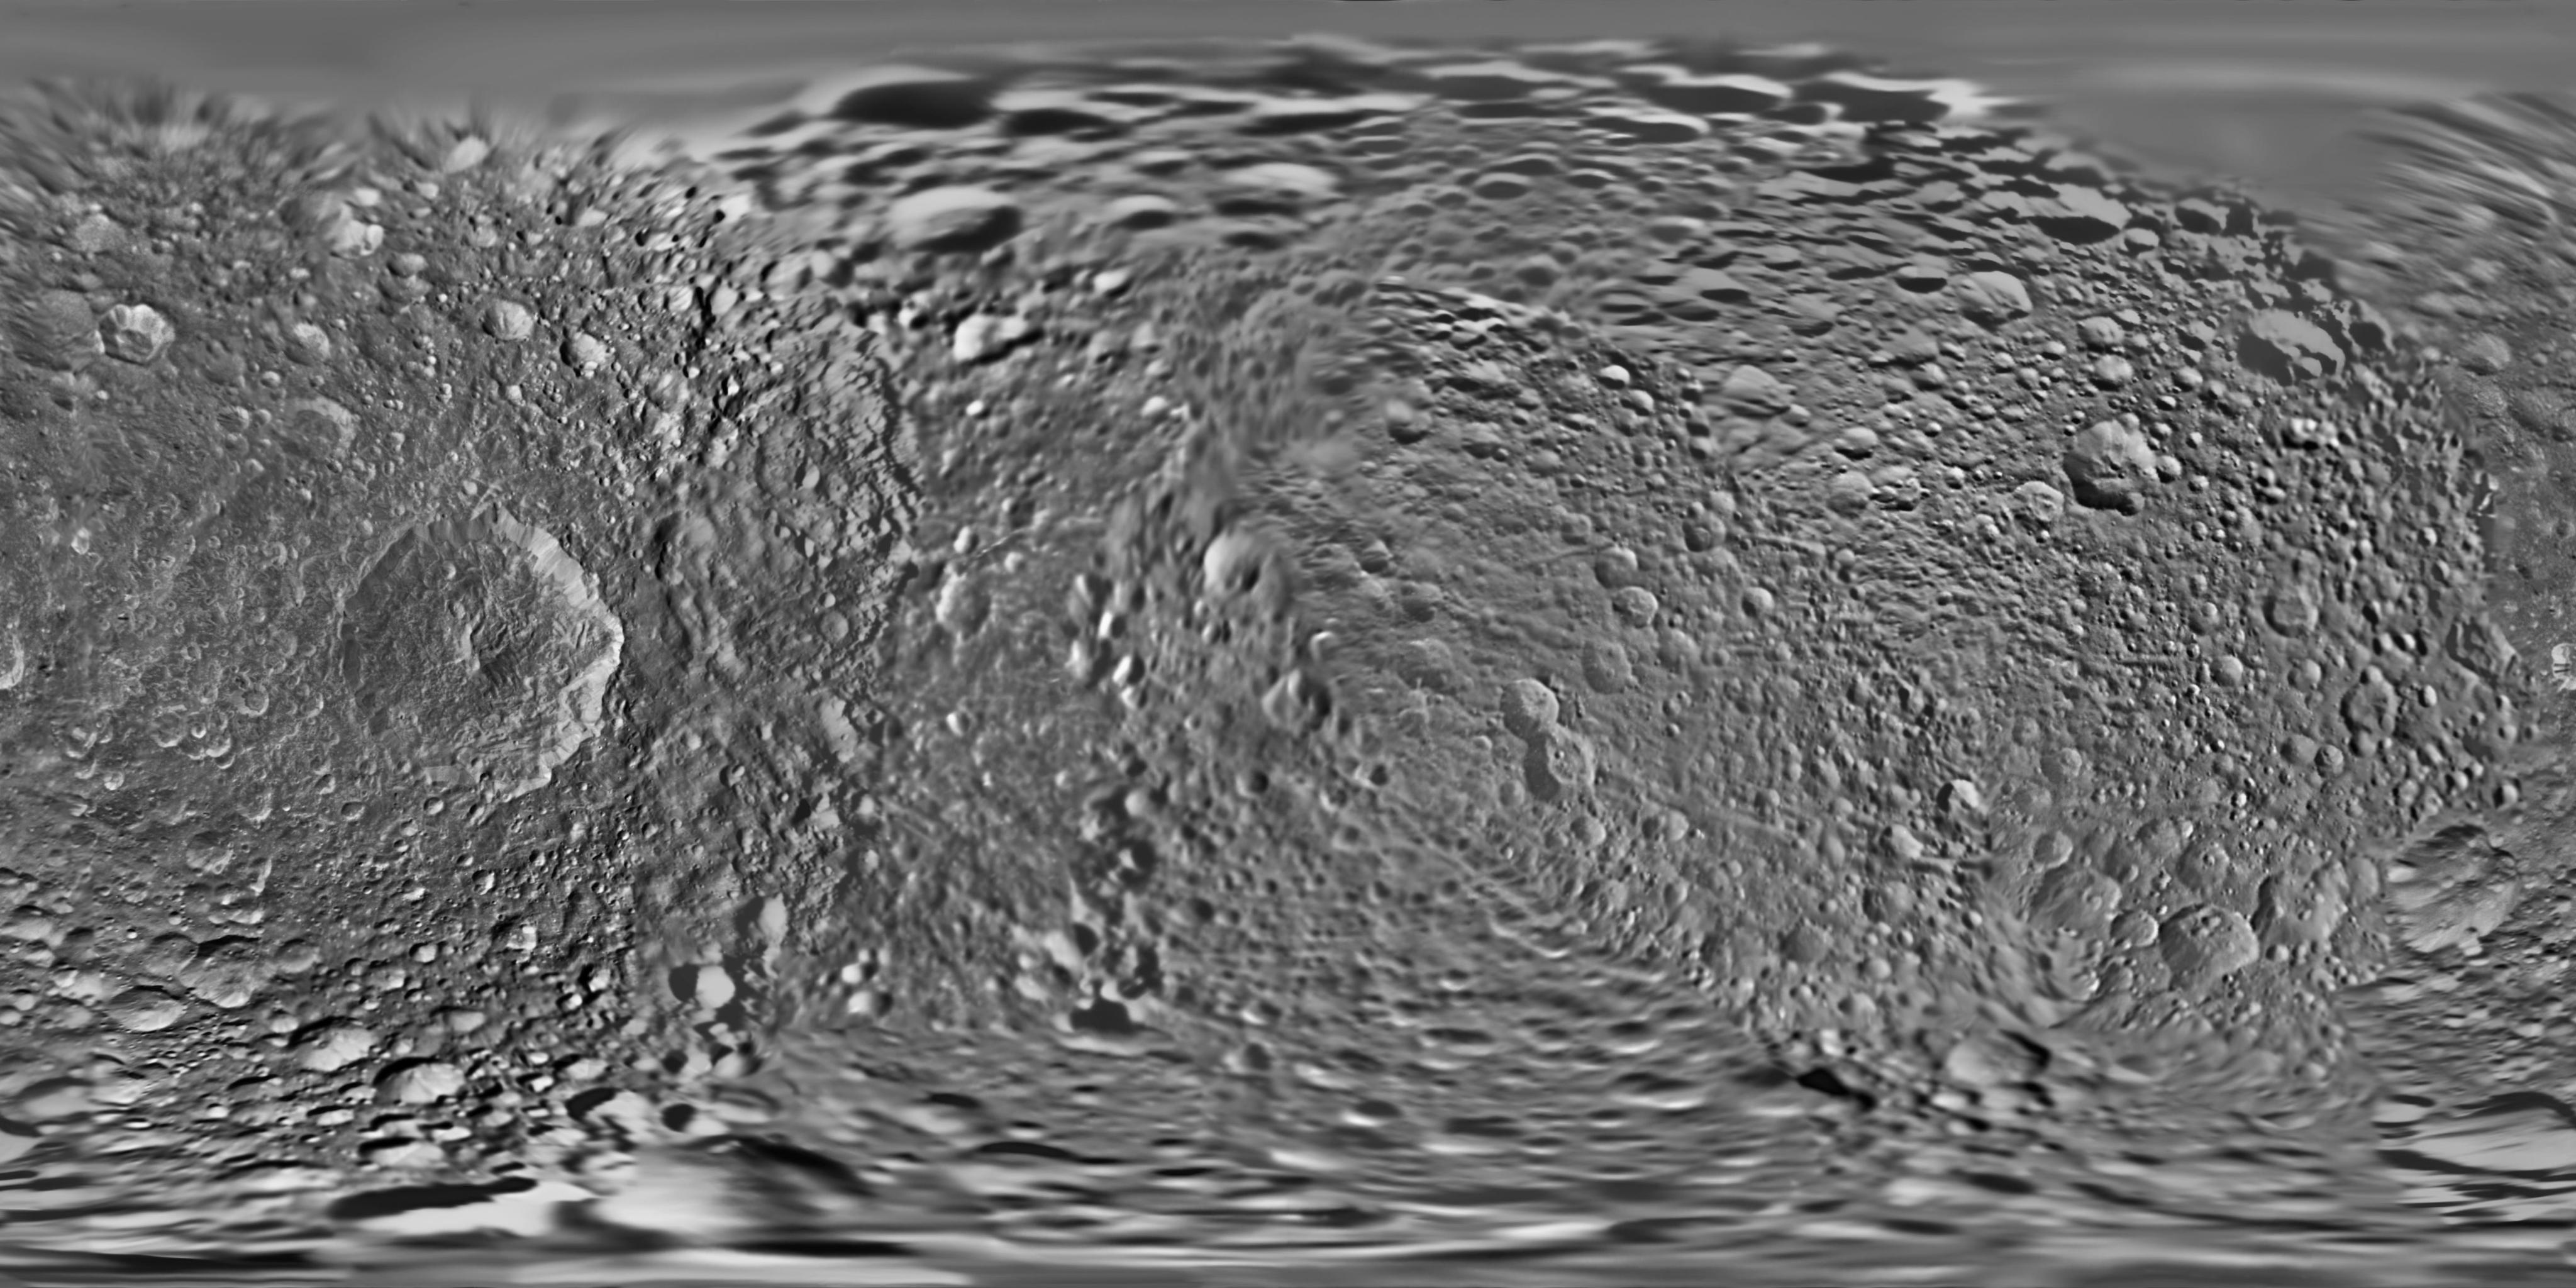 This global map of Saturn's moon Mimas was created using images taken during Cassini spacecraft flybys, with Voyager images filling in the gaps in Cassini's coverage.